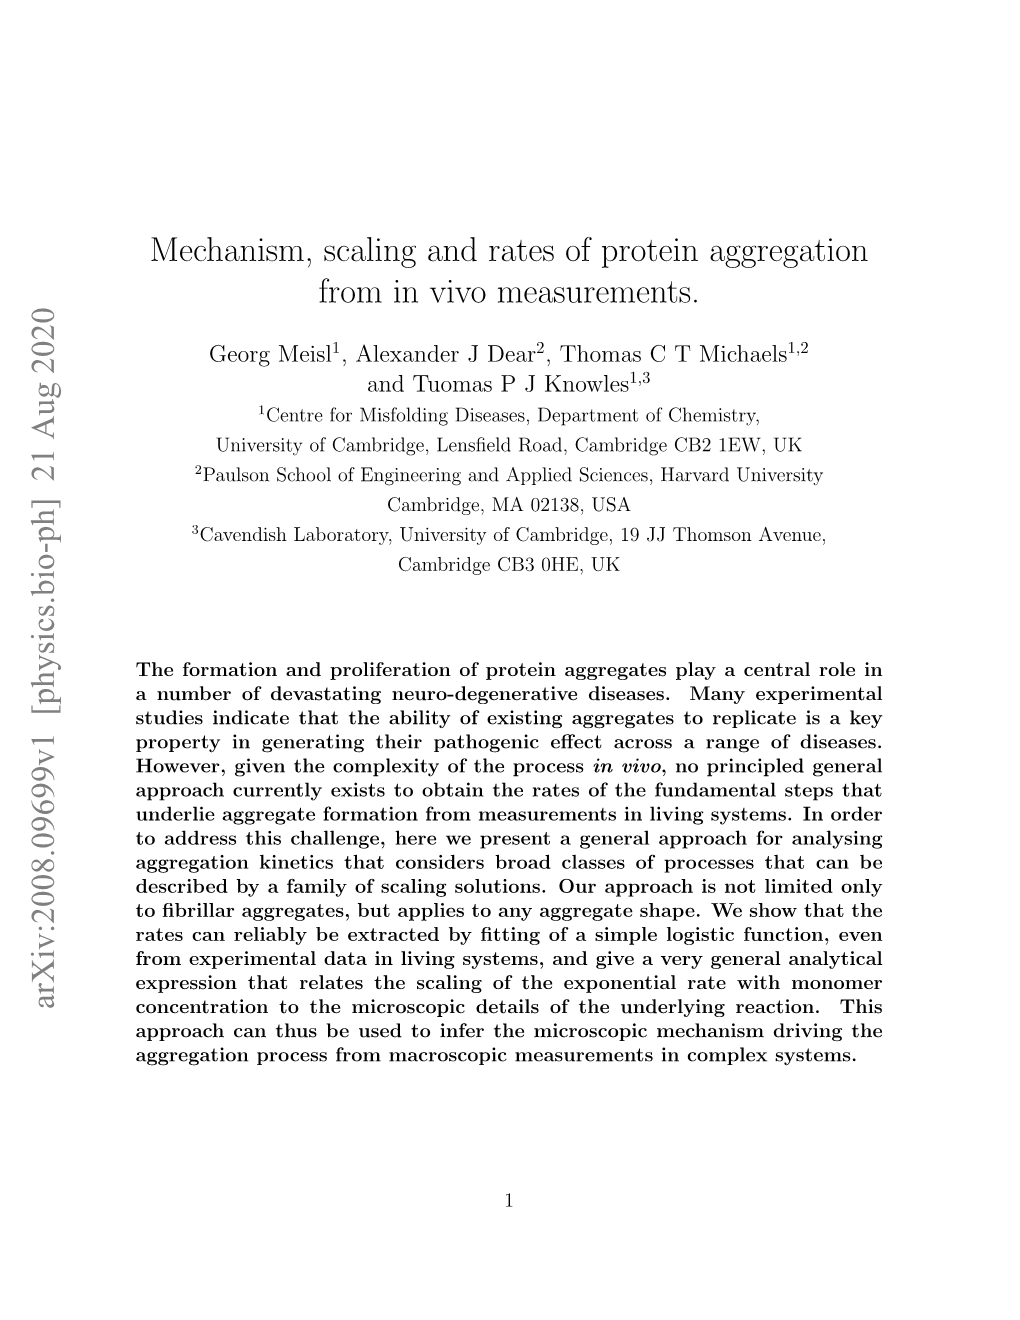 Mechanism, Scaling and Rates of Protein Aggregation from in Vivo Measurements